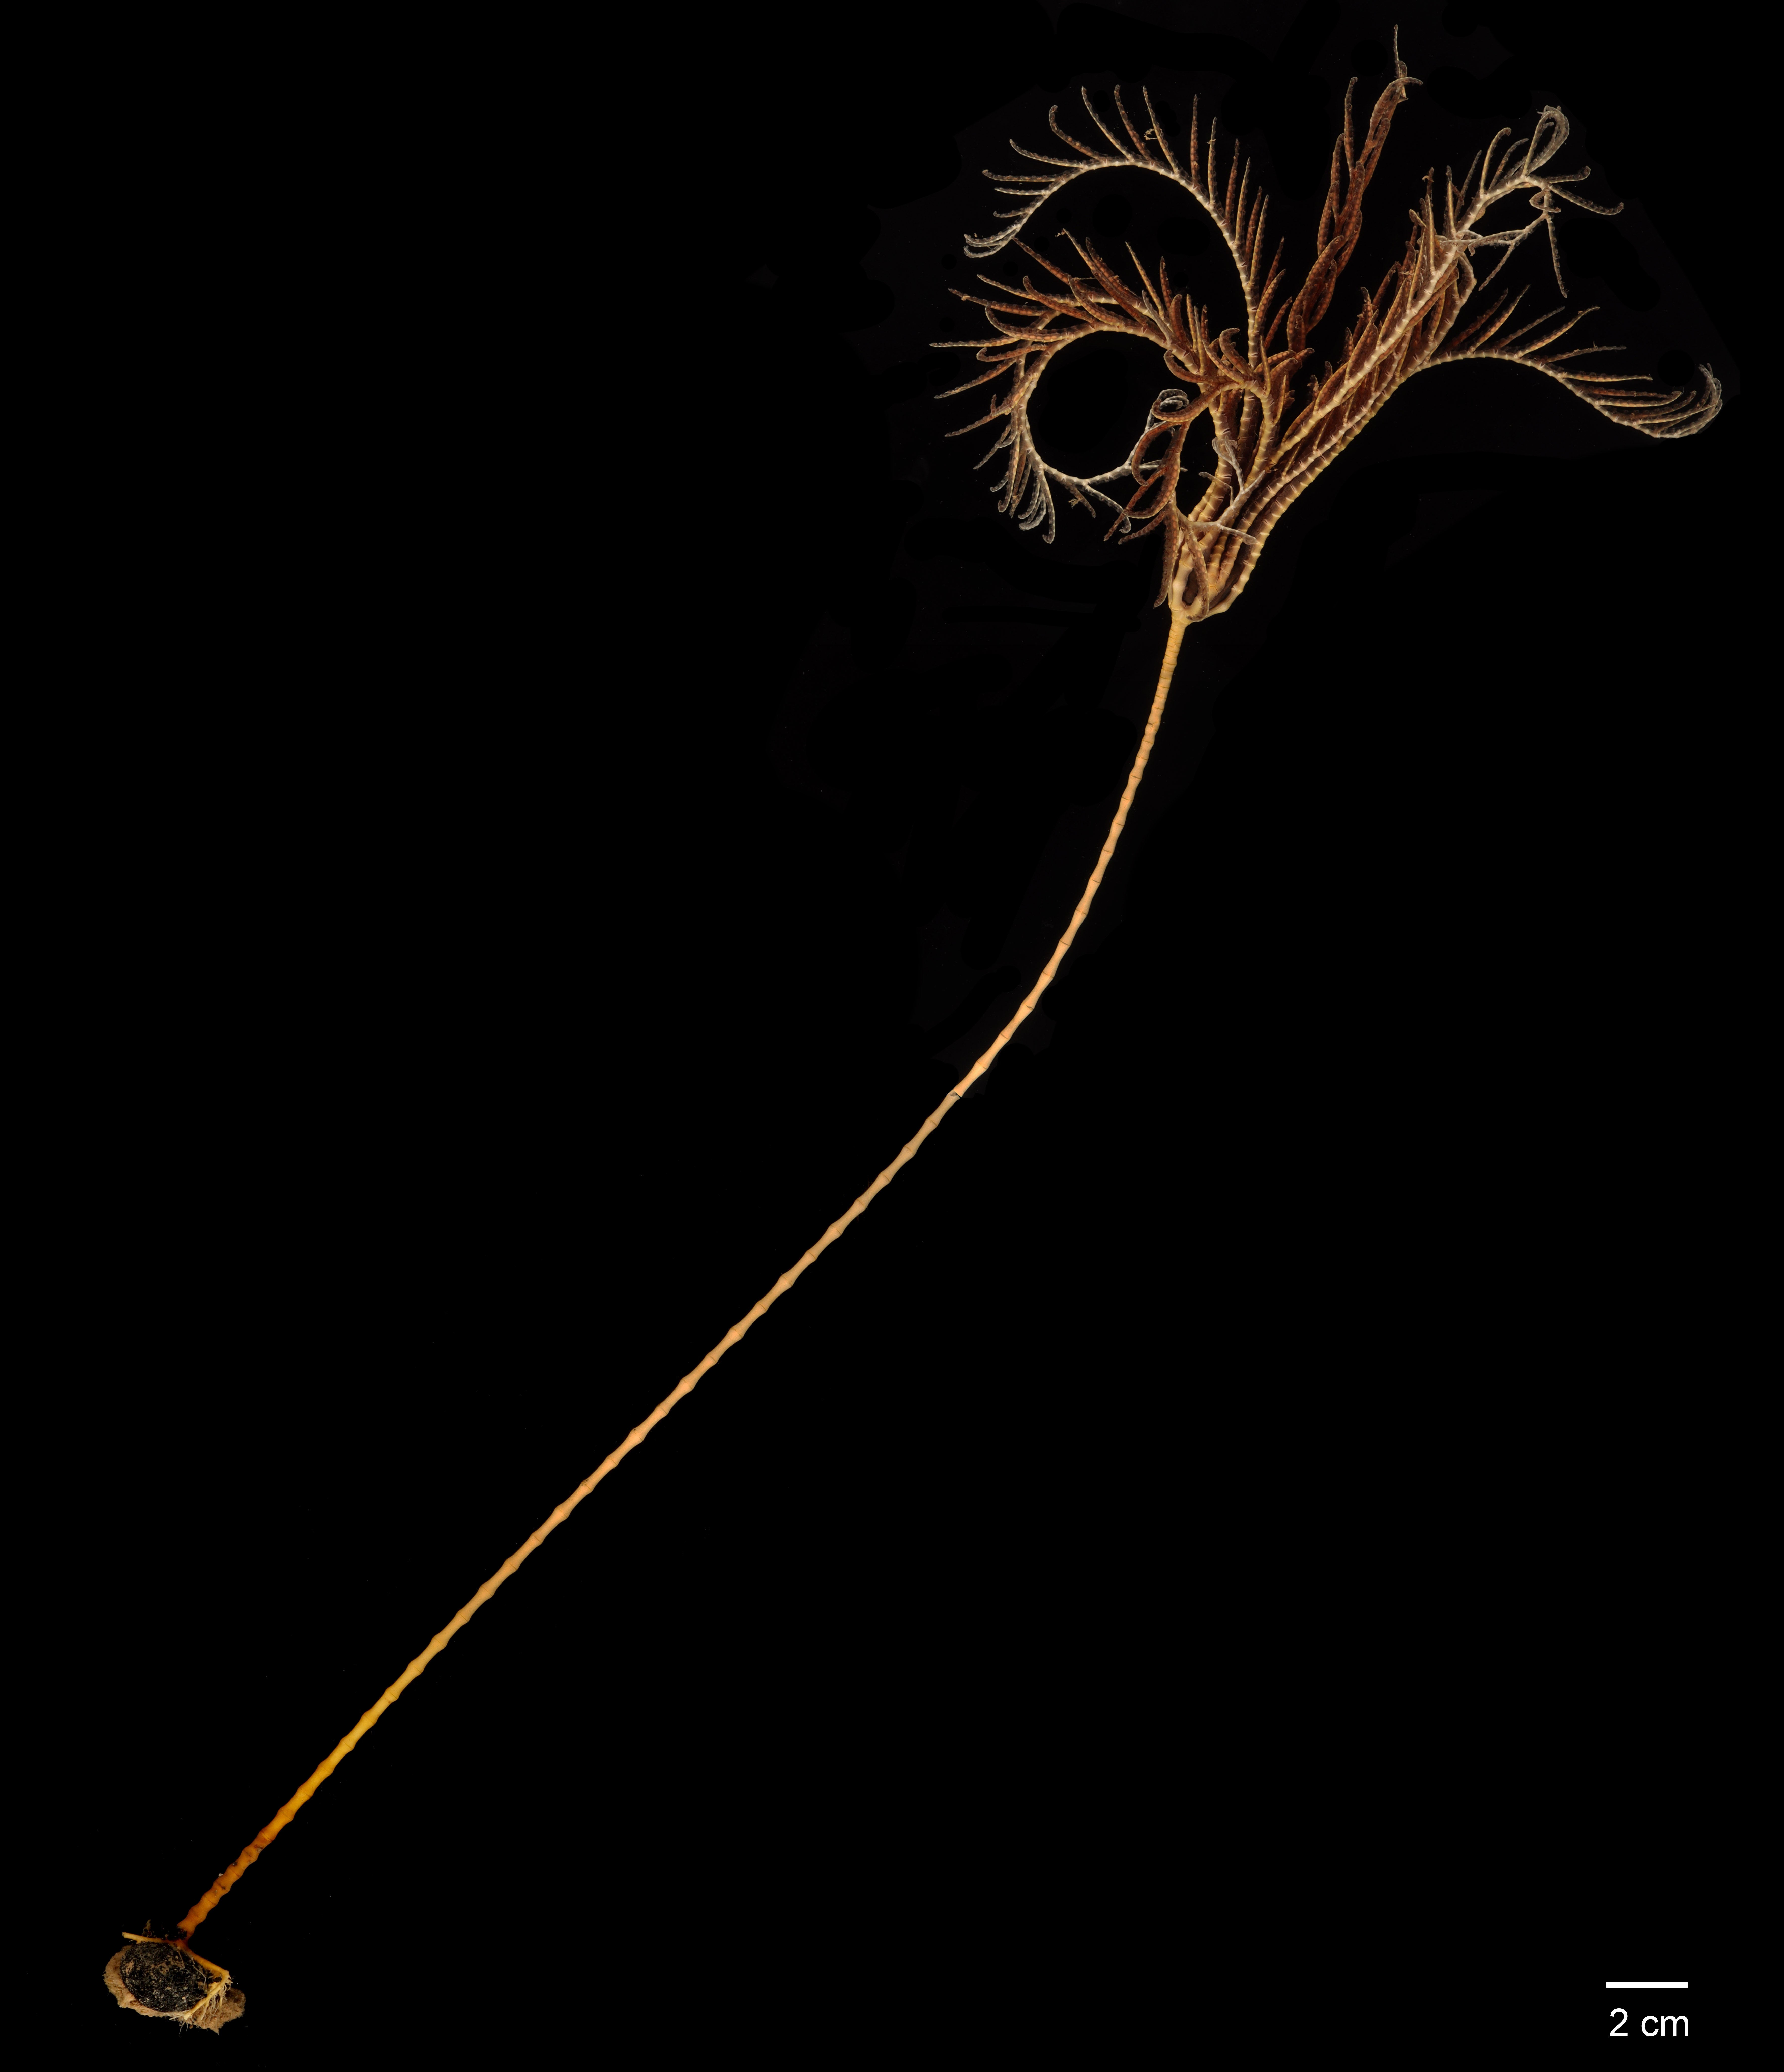 An unknown species of sea lily (Crinoidea sp.) (Photo: SMARTEX Project, Natural Environment Research Council, UK smartexccz.org)